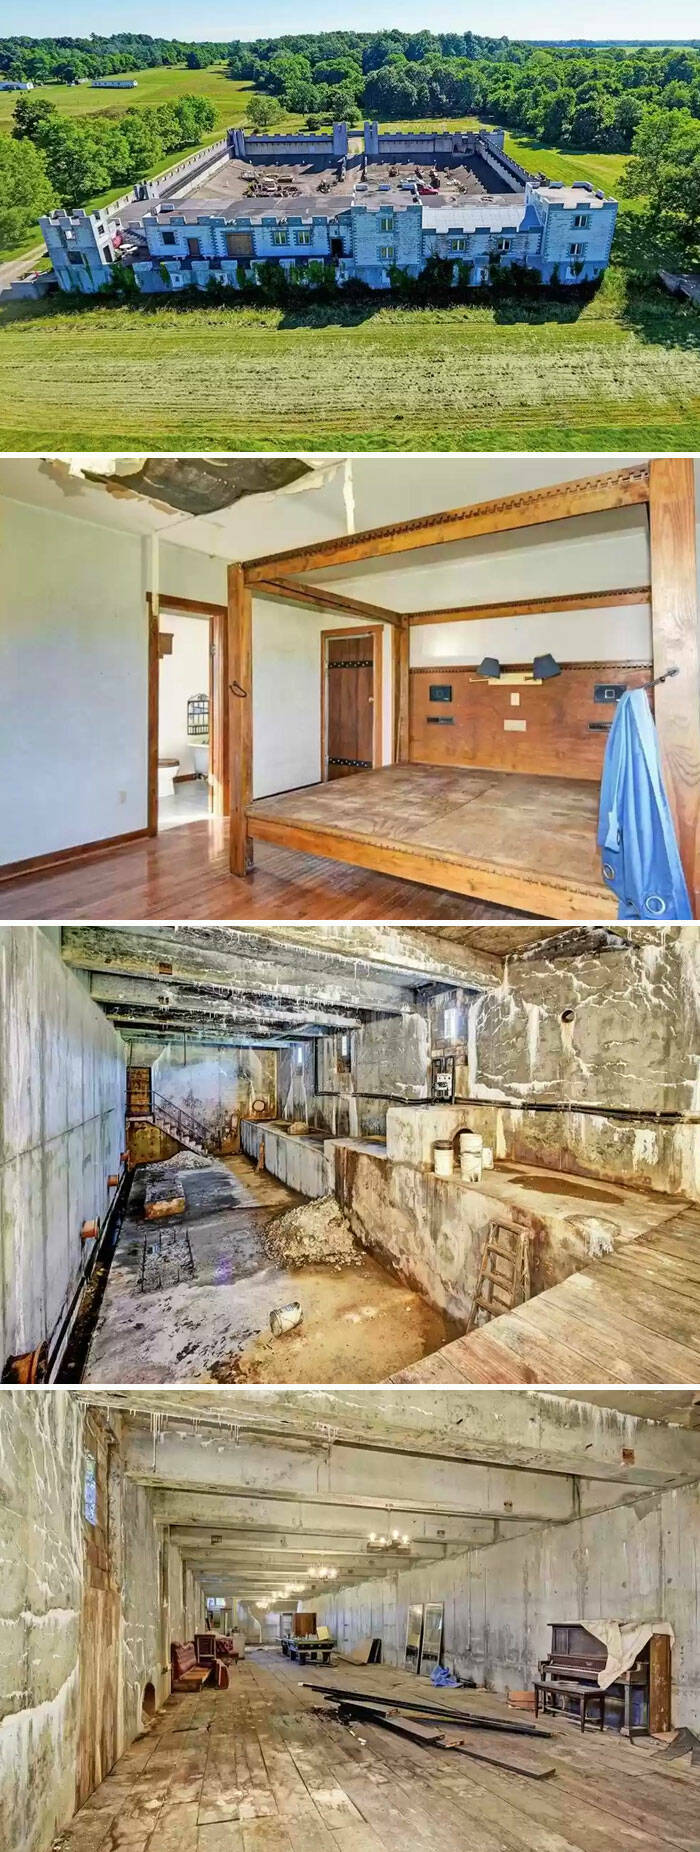 These Real Estate Listings Are Anything But Normal!